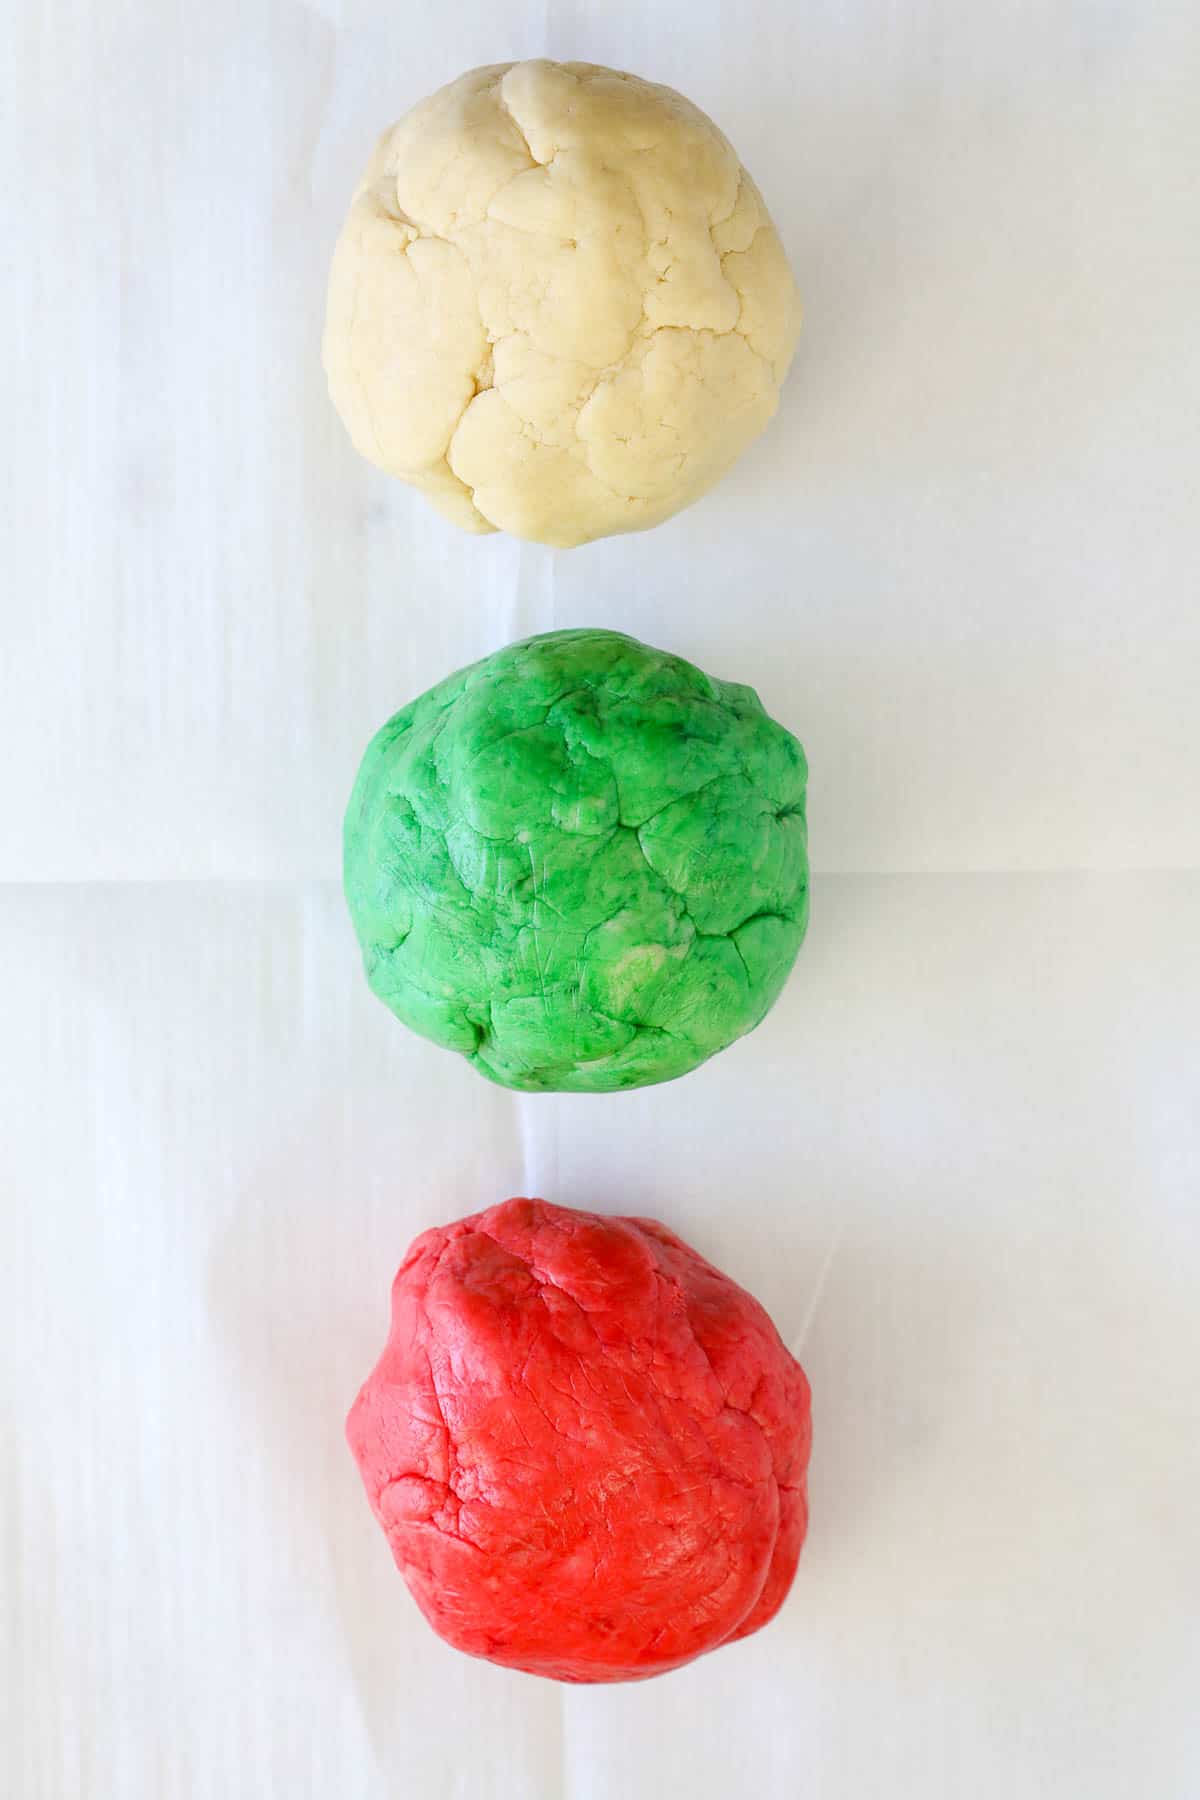 Three cookie dough balls: a white, a green, and a red ball in a row.